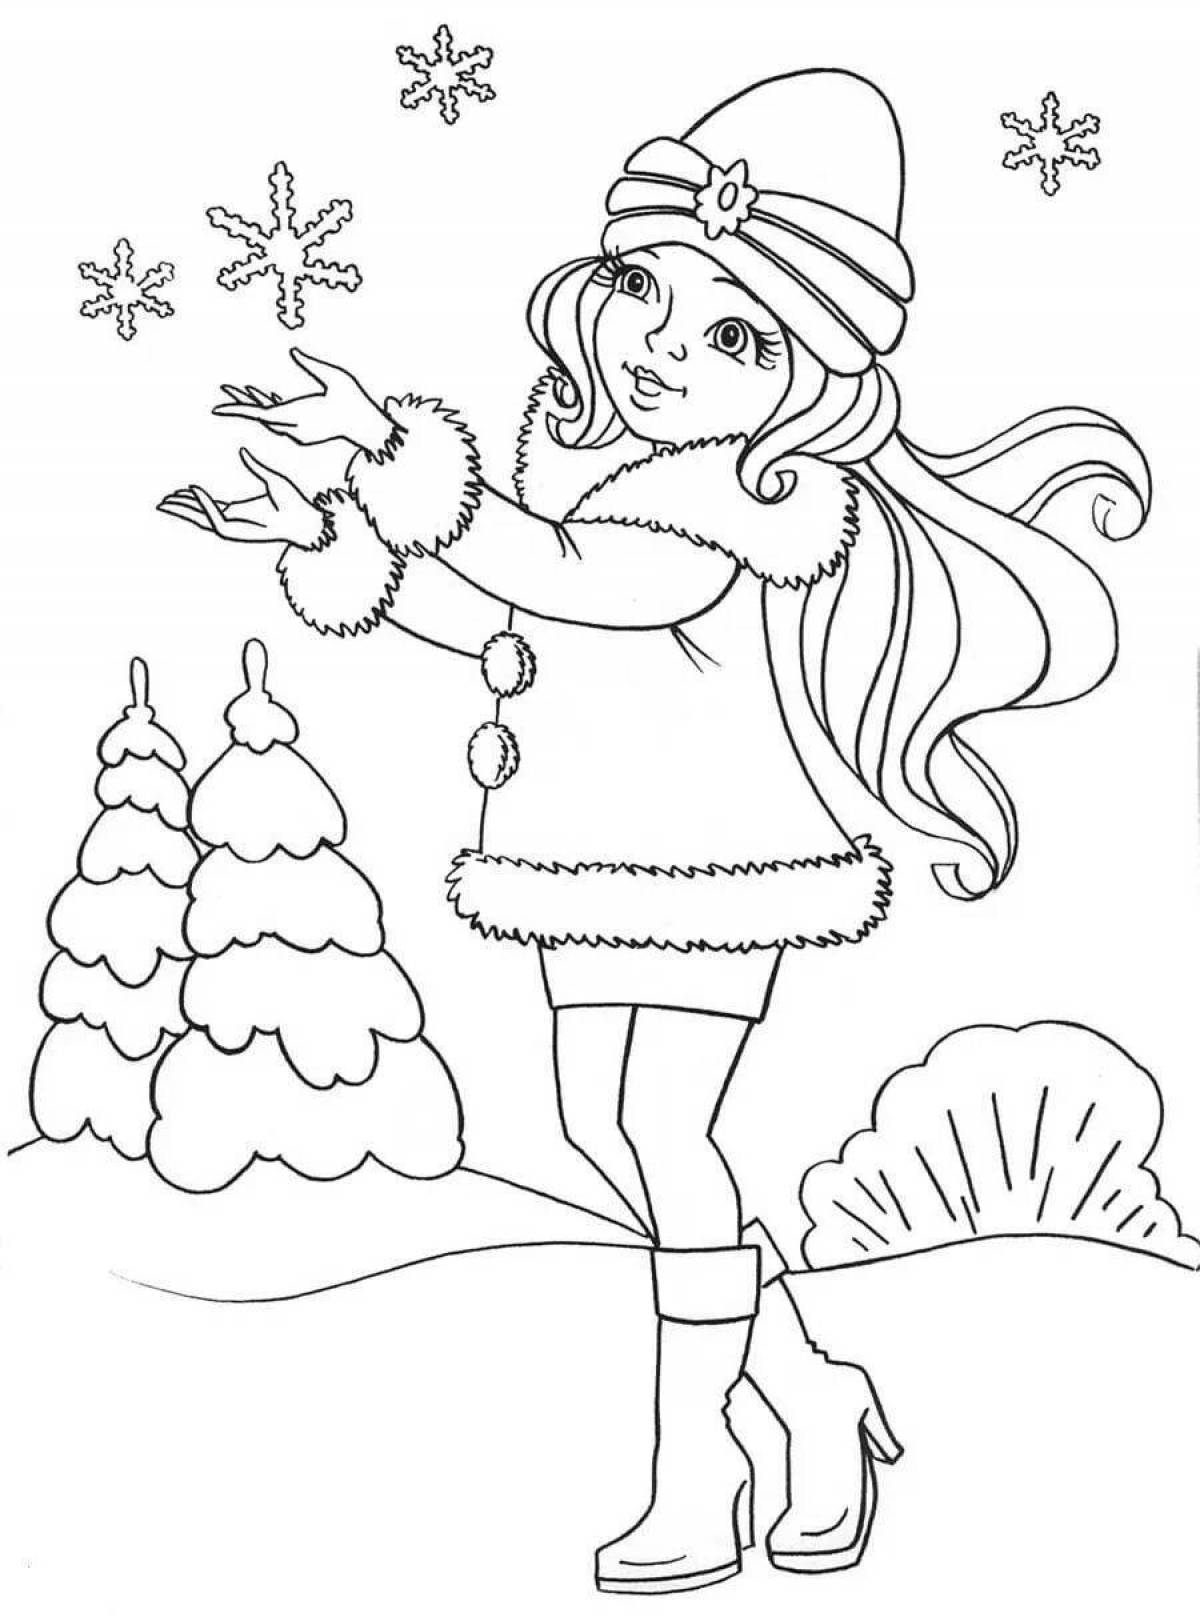 Playful Christmas coloring book for girls 8 years old